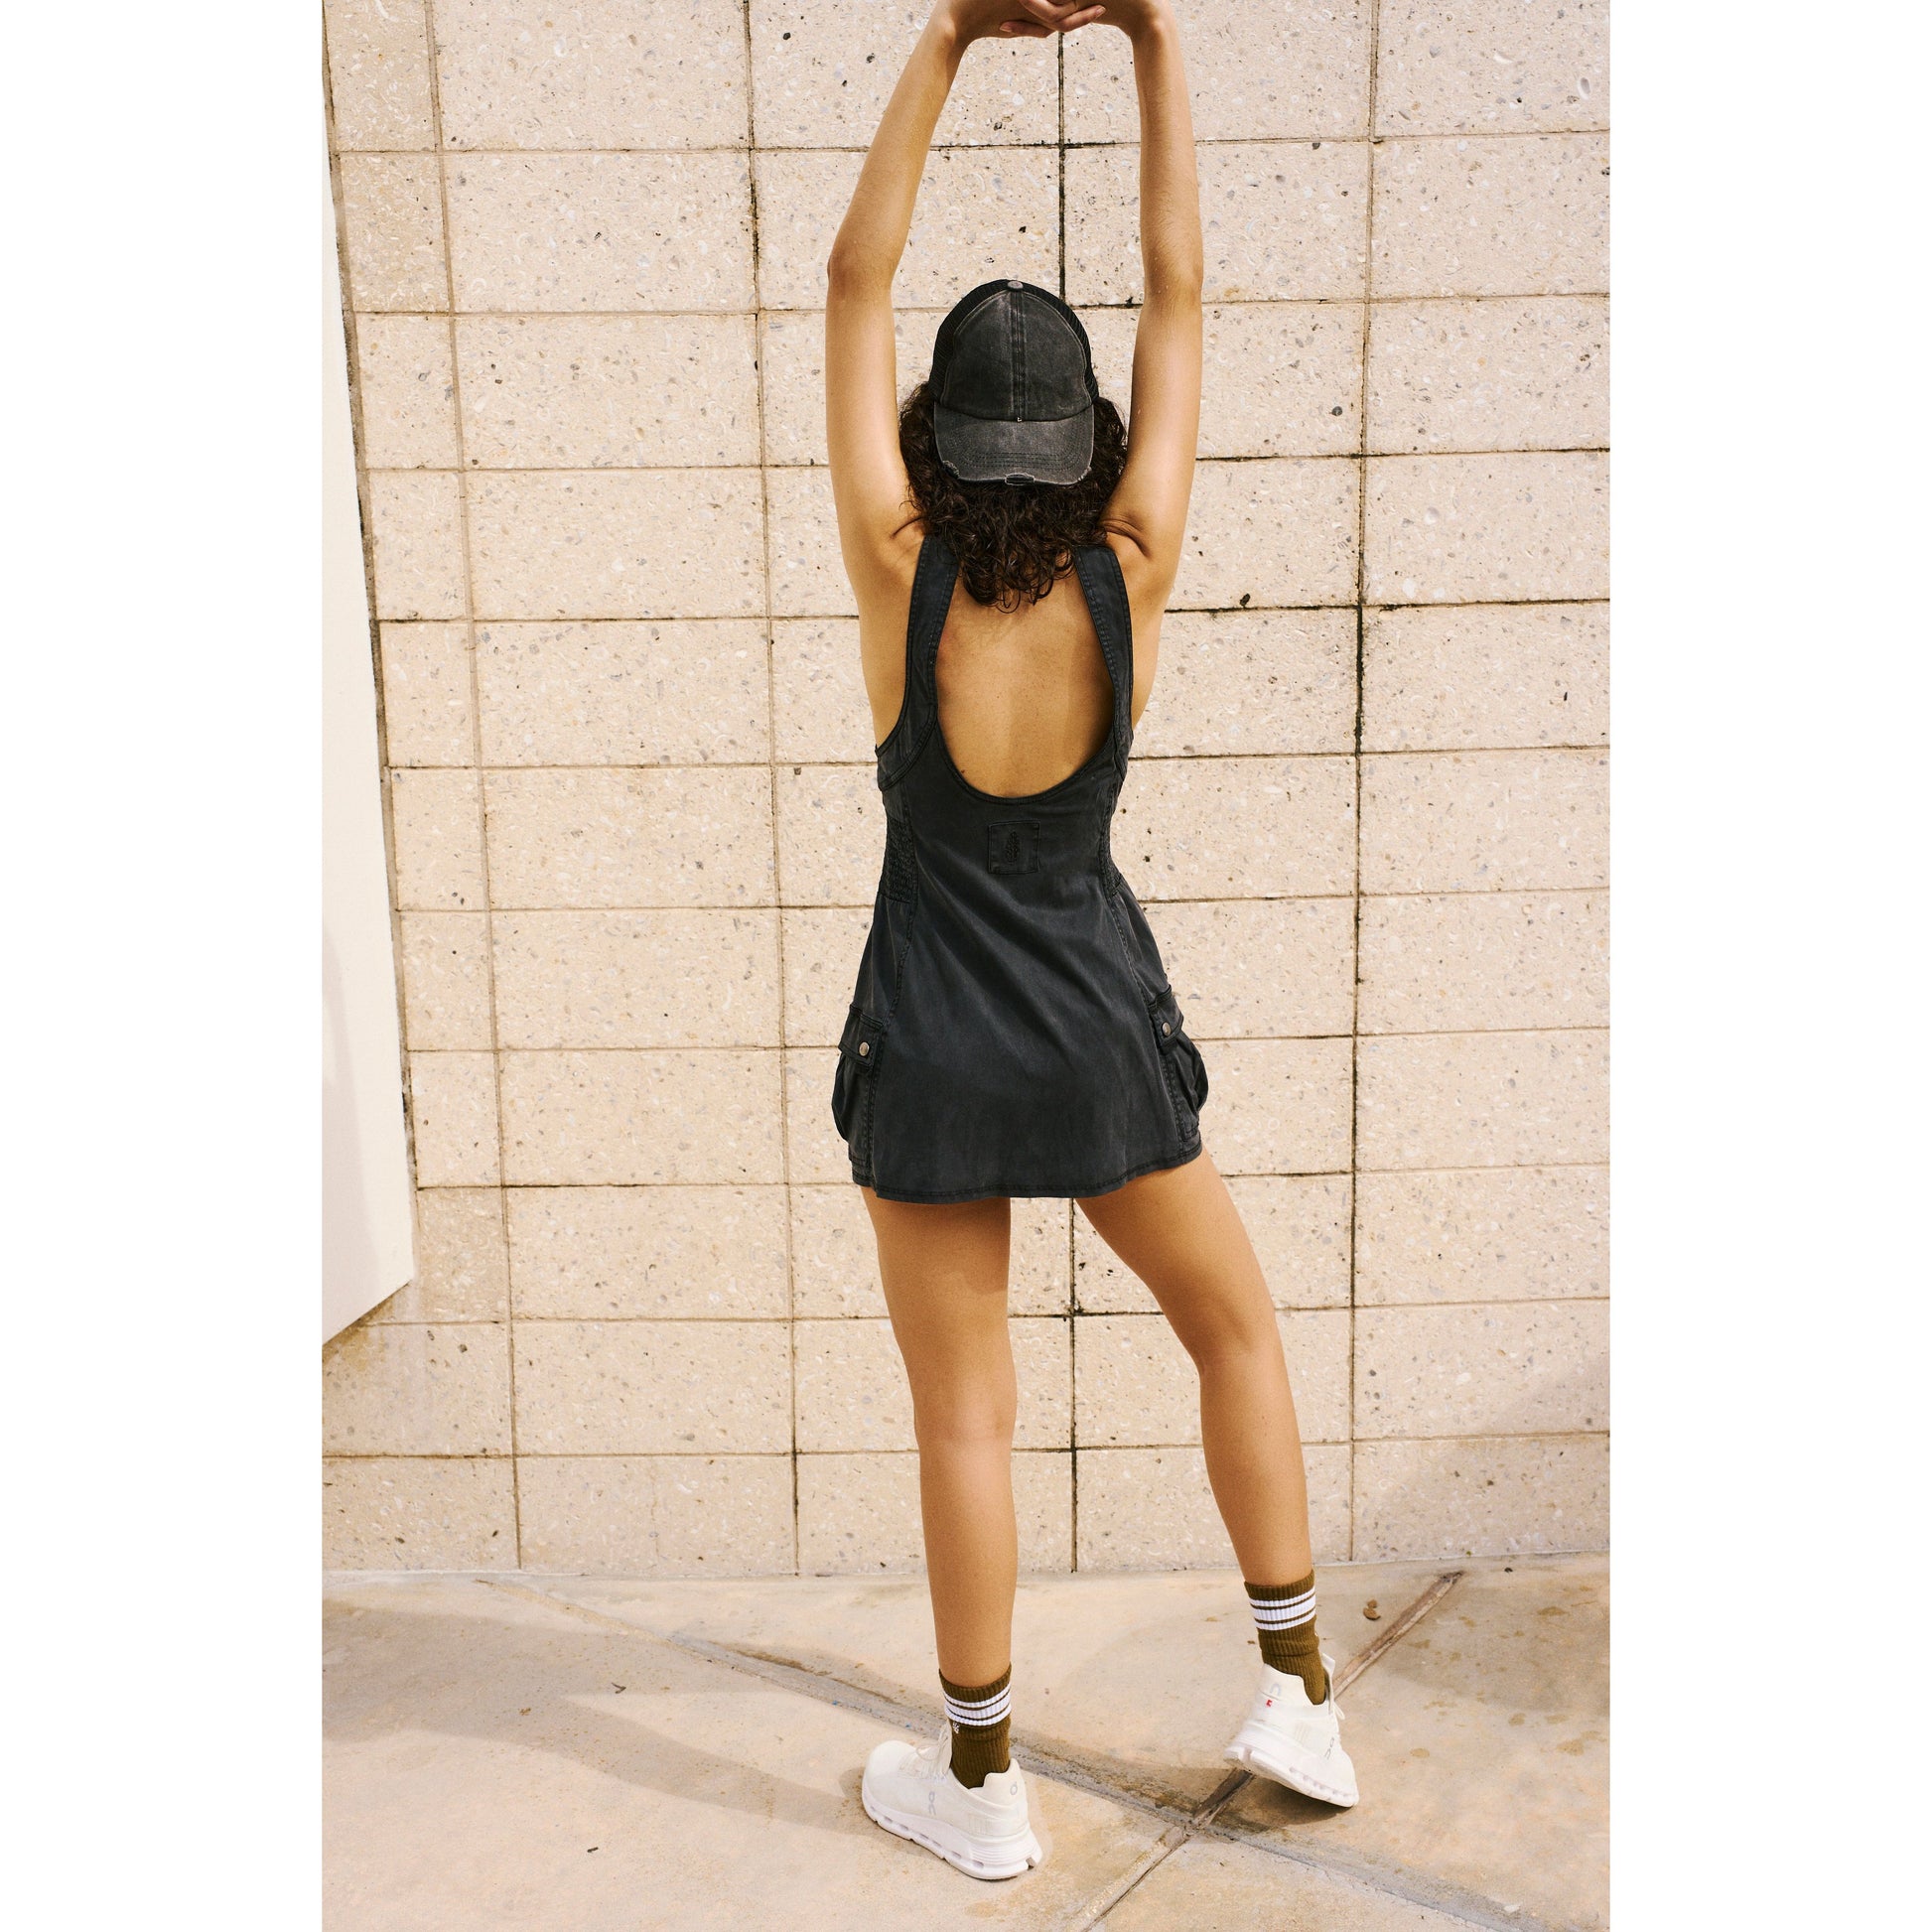 A woman in a dark Fast Track Skortsie by Free People Movement with cargo-inspired fabrication and cap stretches her arms upwards against a beige tiled wall, wearing white sneakers and striped socks.